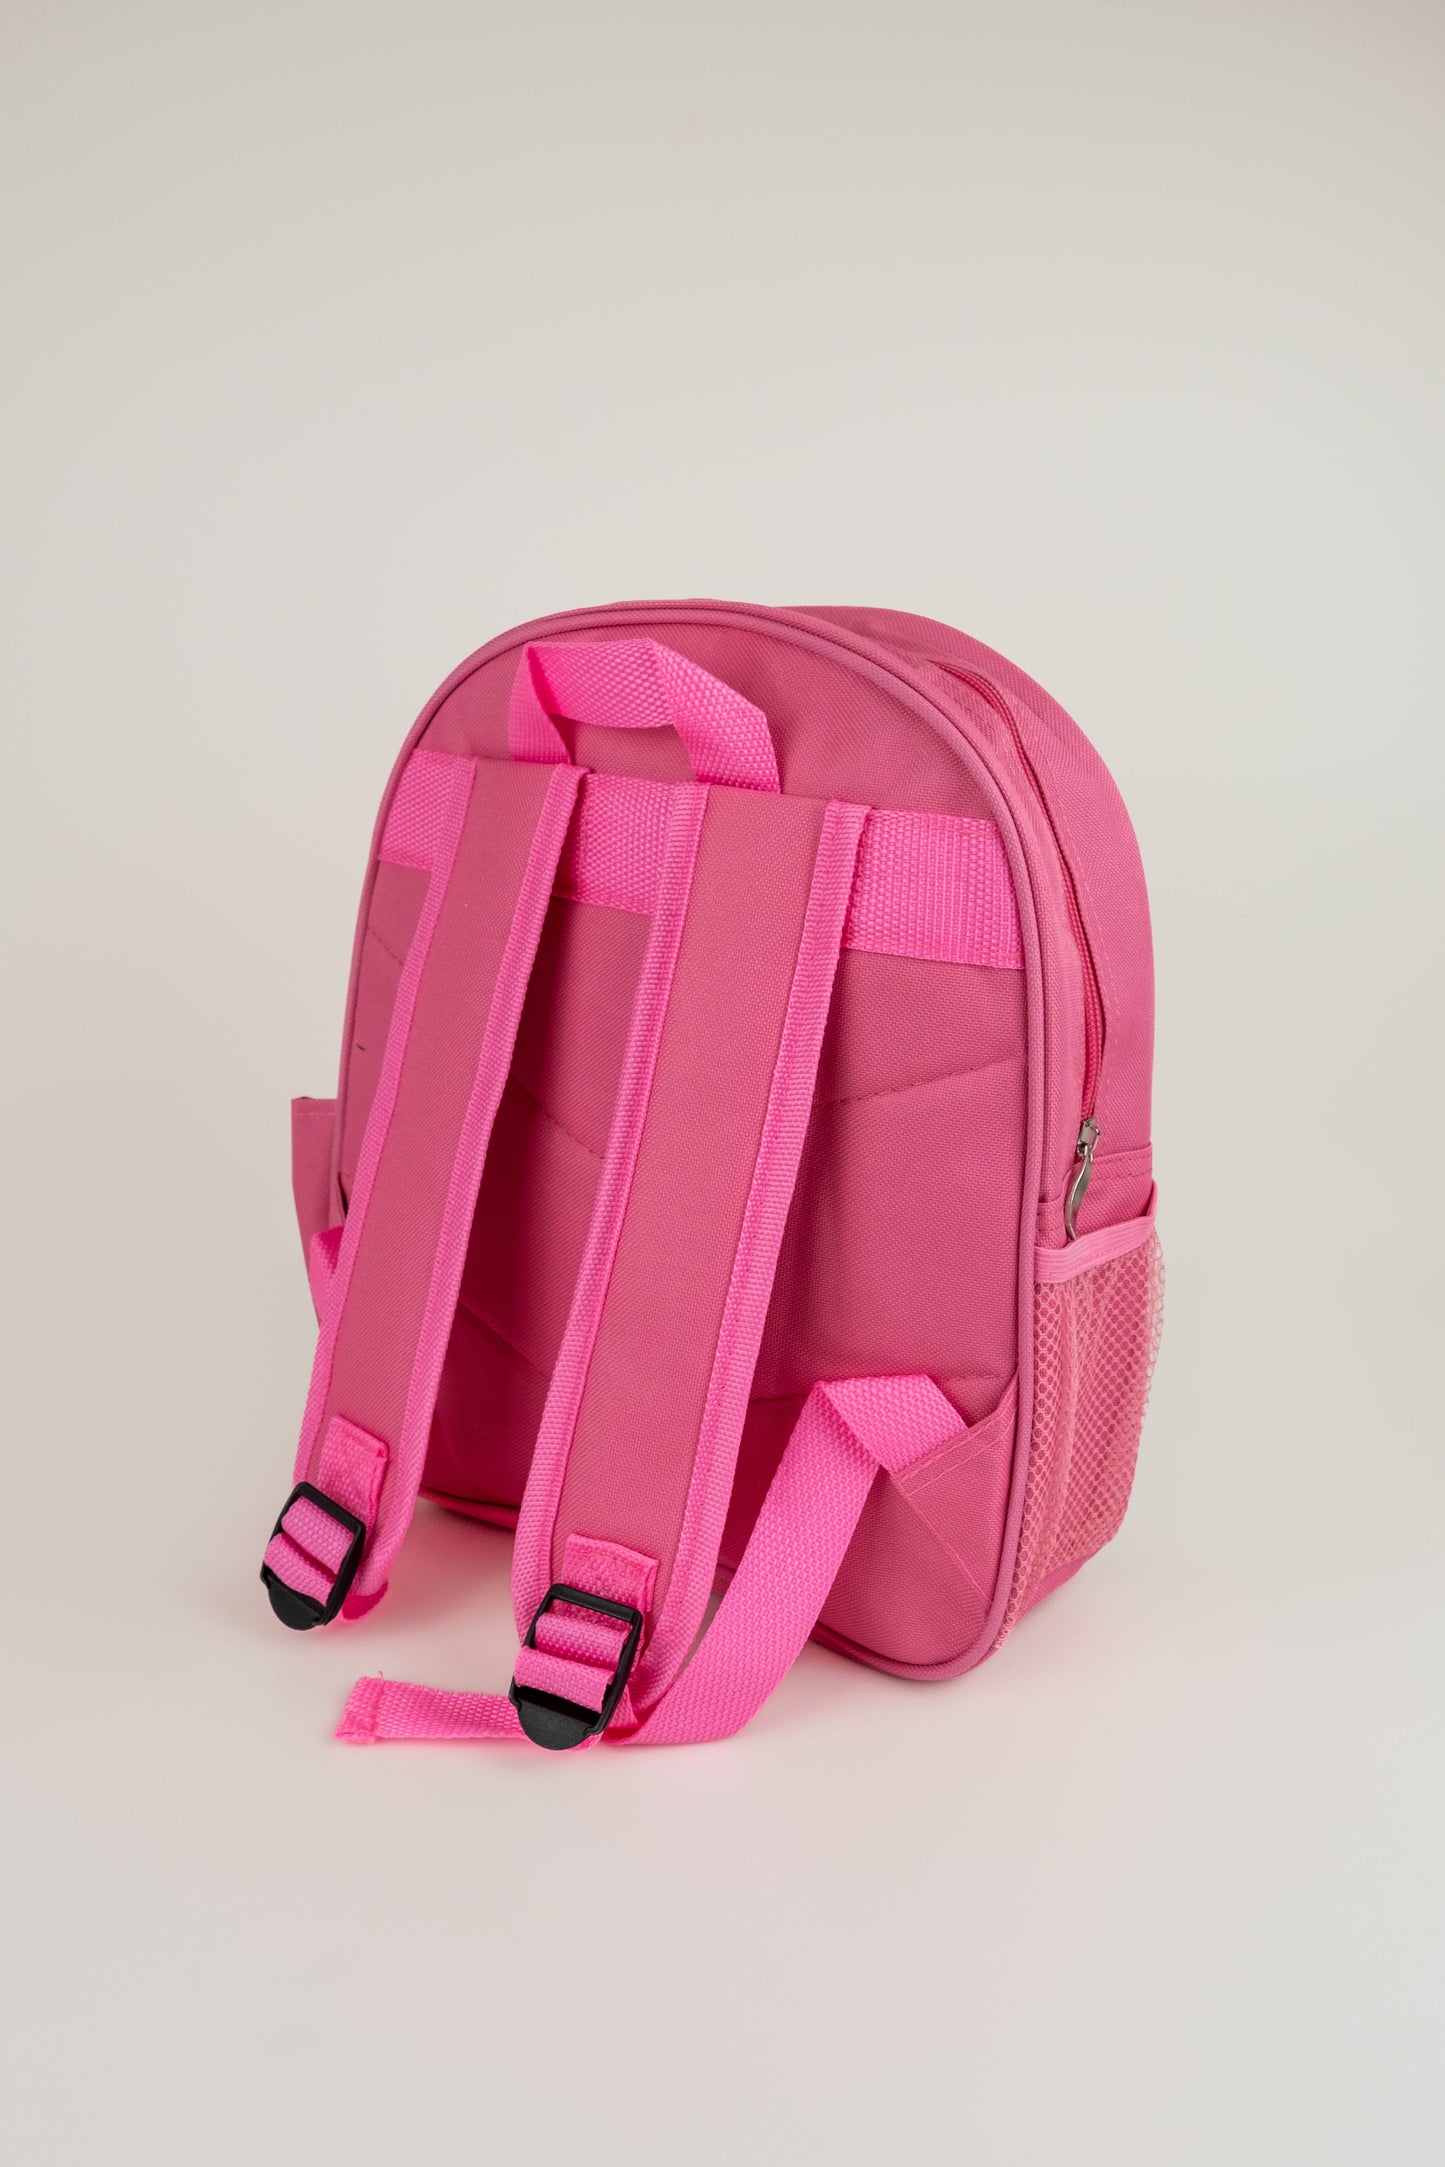 Children’s Personalised Backpack - Space Design